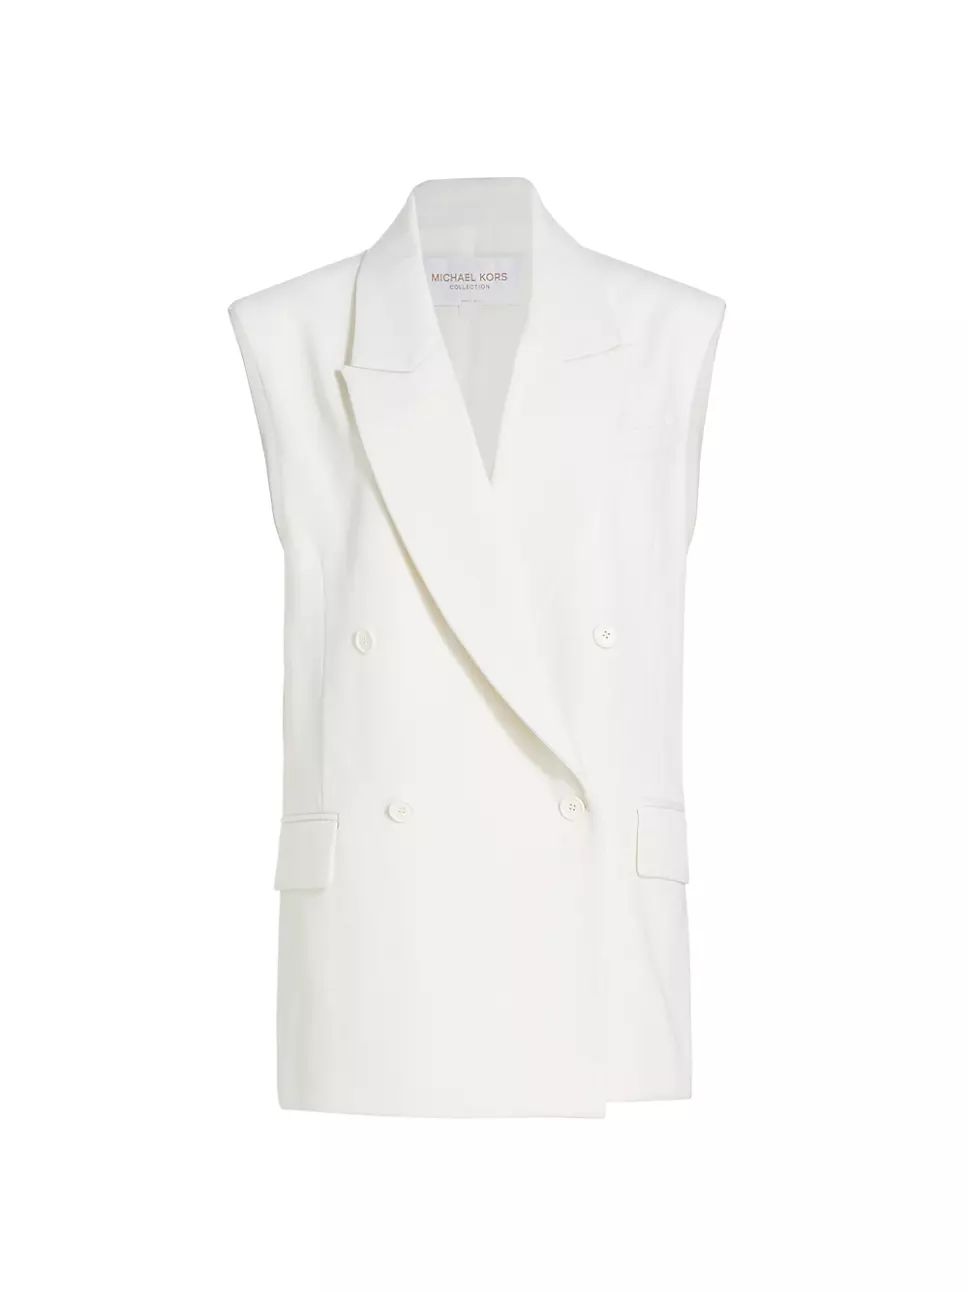 Michael Kors Collection Oversized Double-Breasted Vest | Saks Fifth Avenue